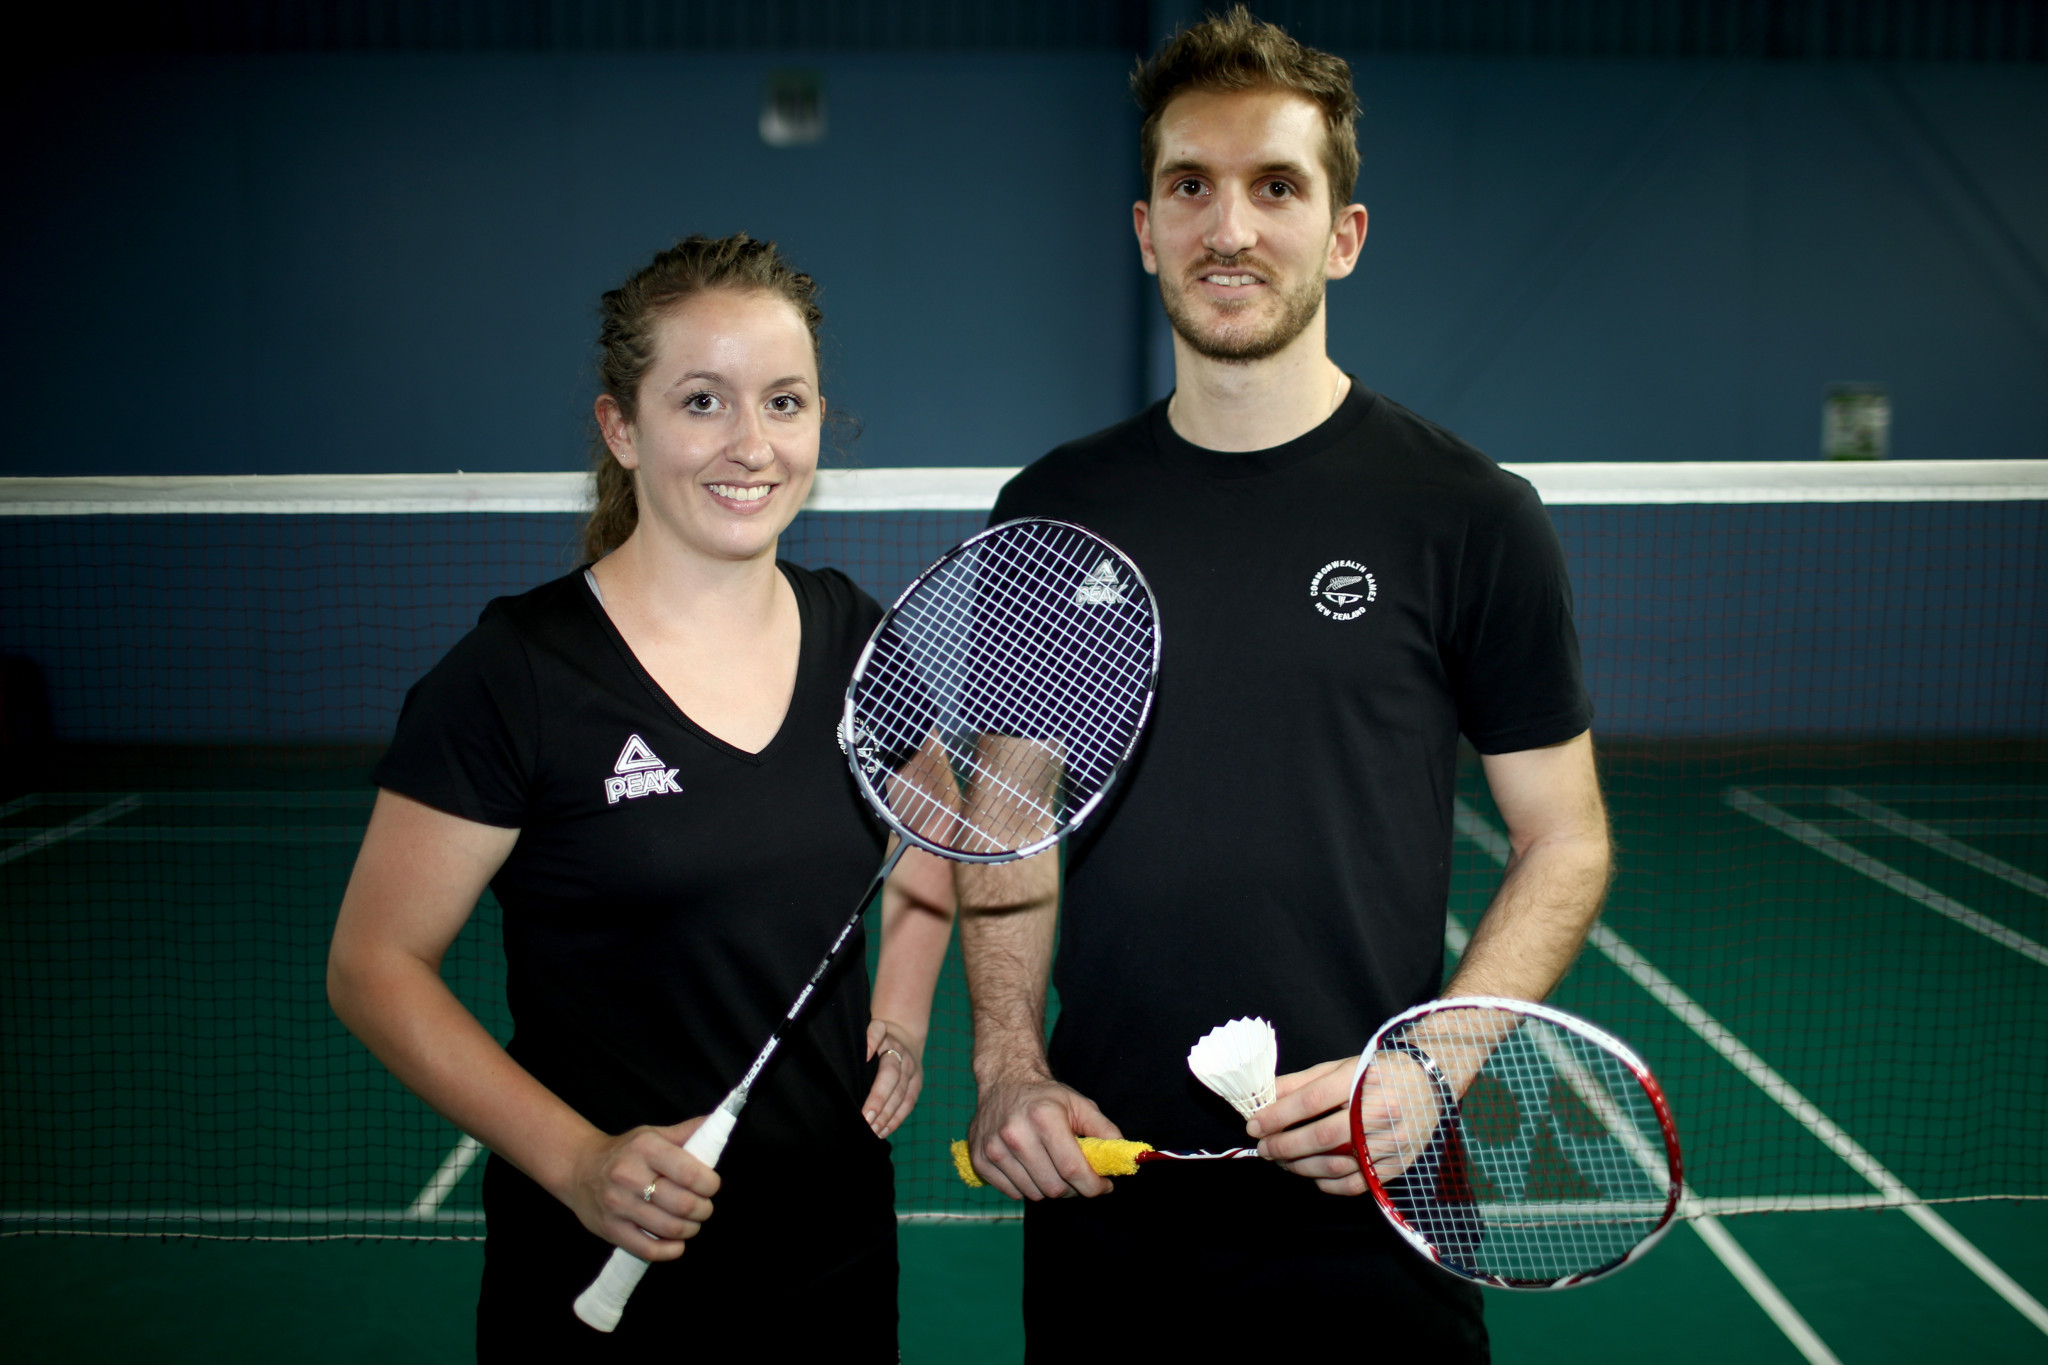 New Zealand select sibling duo for Gold Coast 2018 badminton team